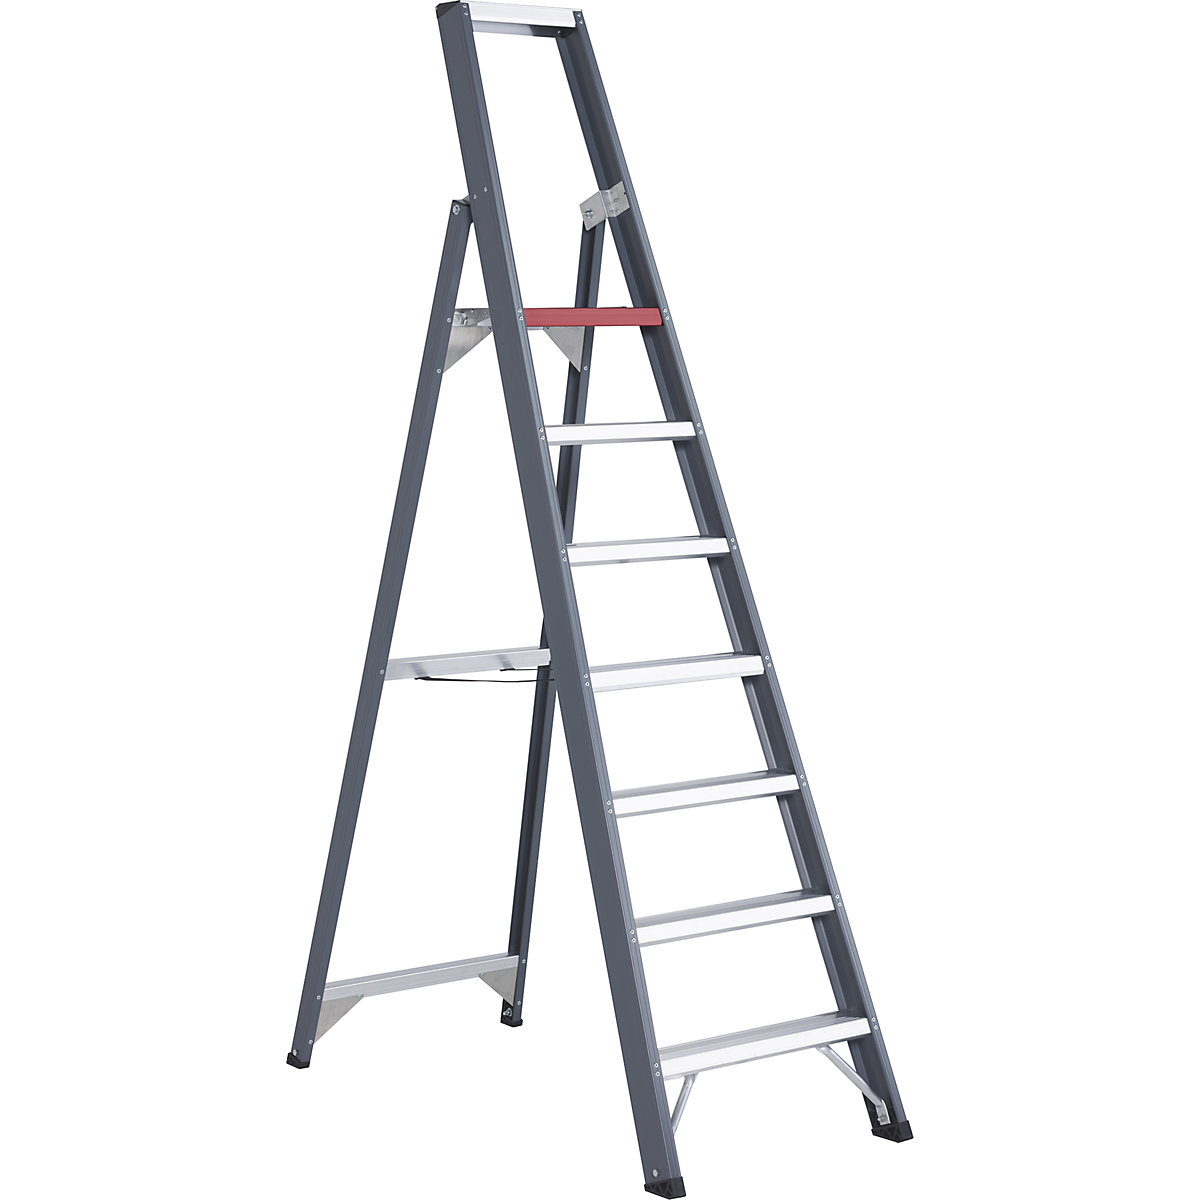 Aluminium step ladder, single sided access – Altrex, with storage tray, 7 steps, working height 3650 mm-11